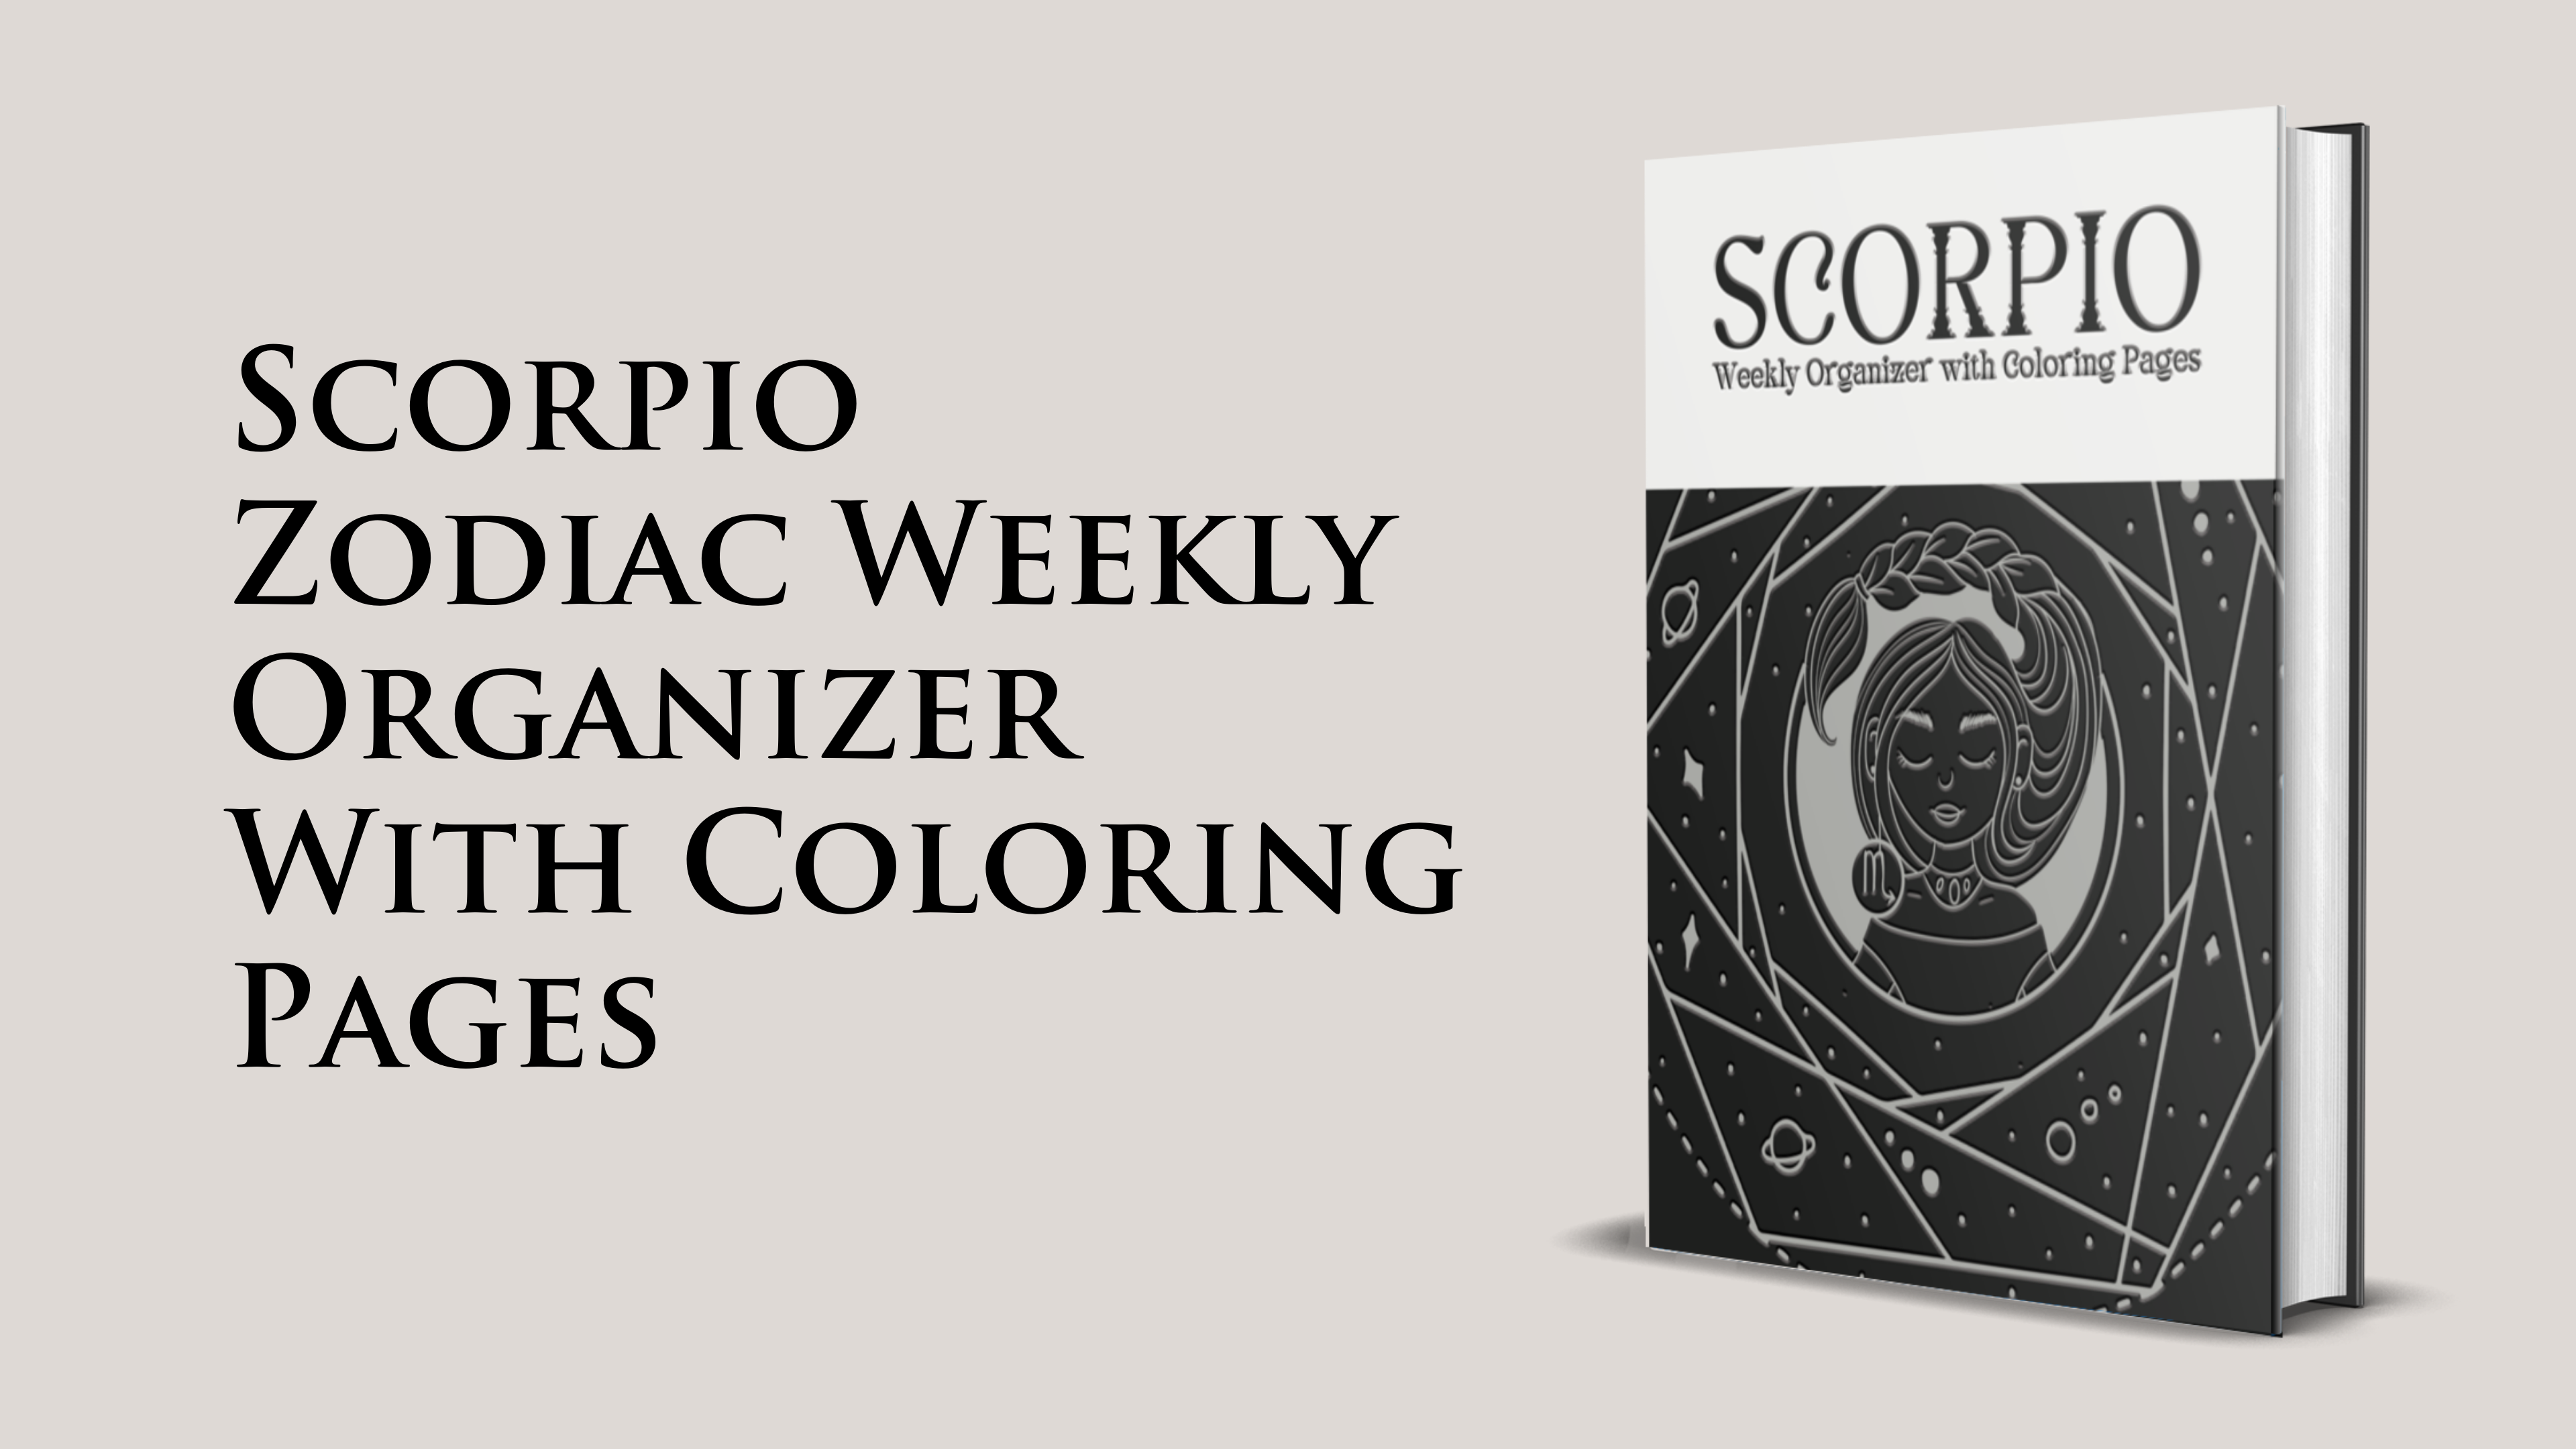 Scorpio Zodiac Weekly Organizer With Coloring Pages